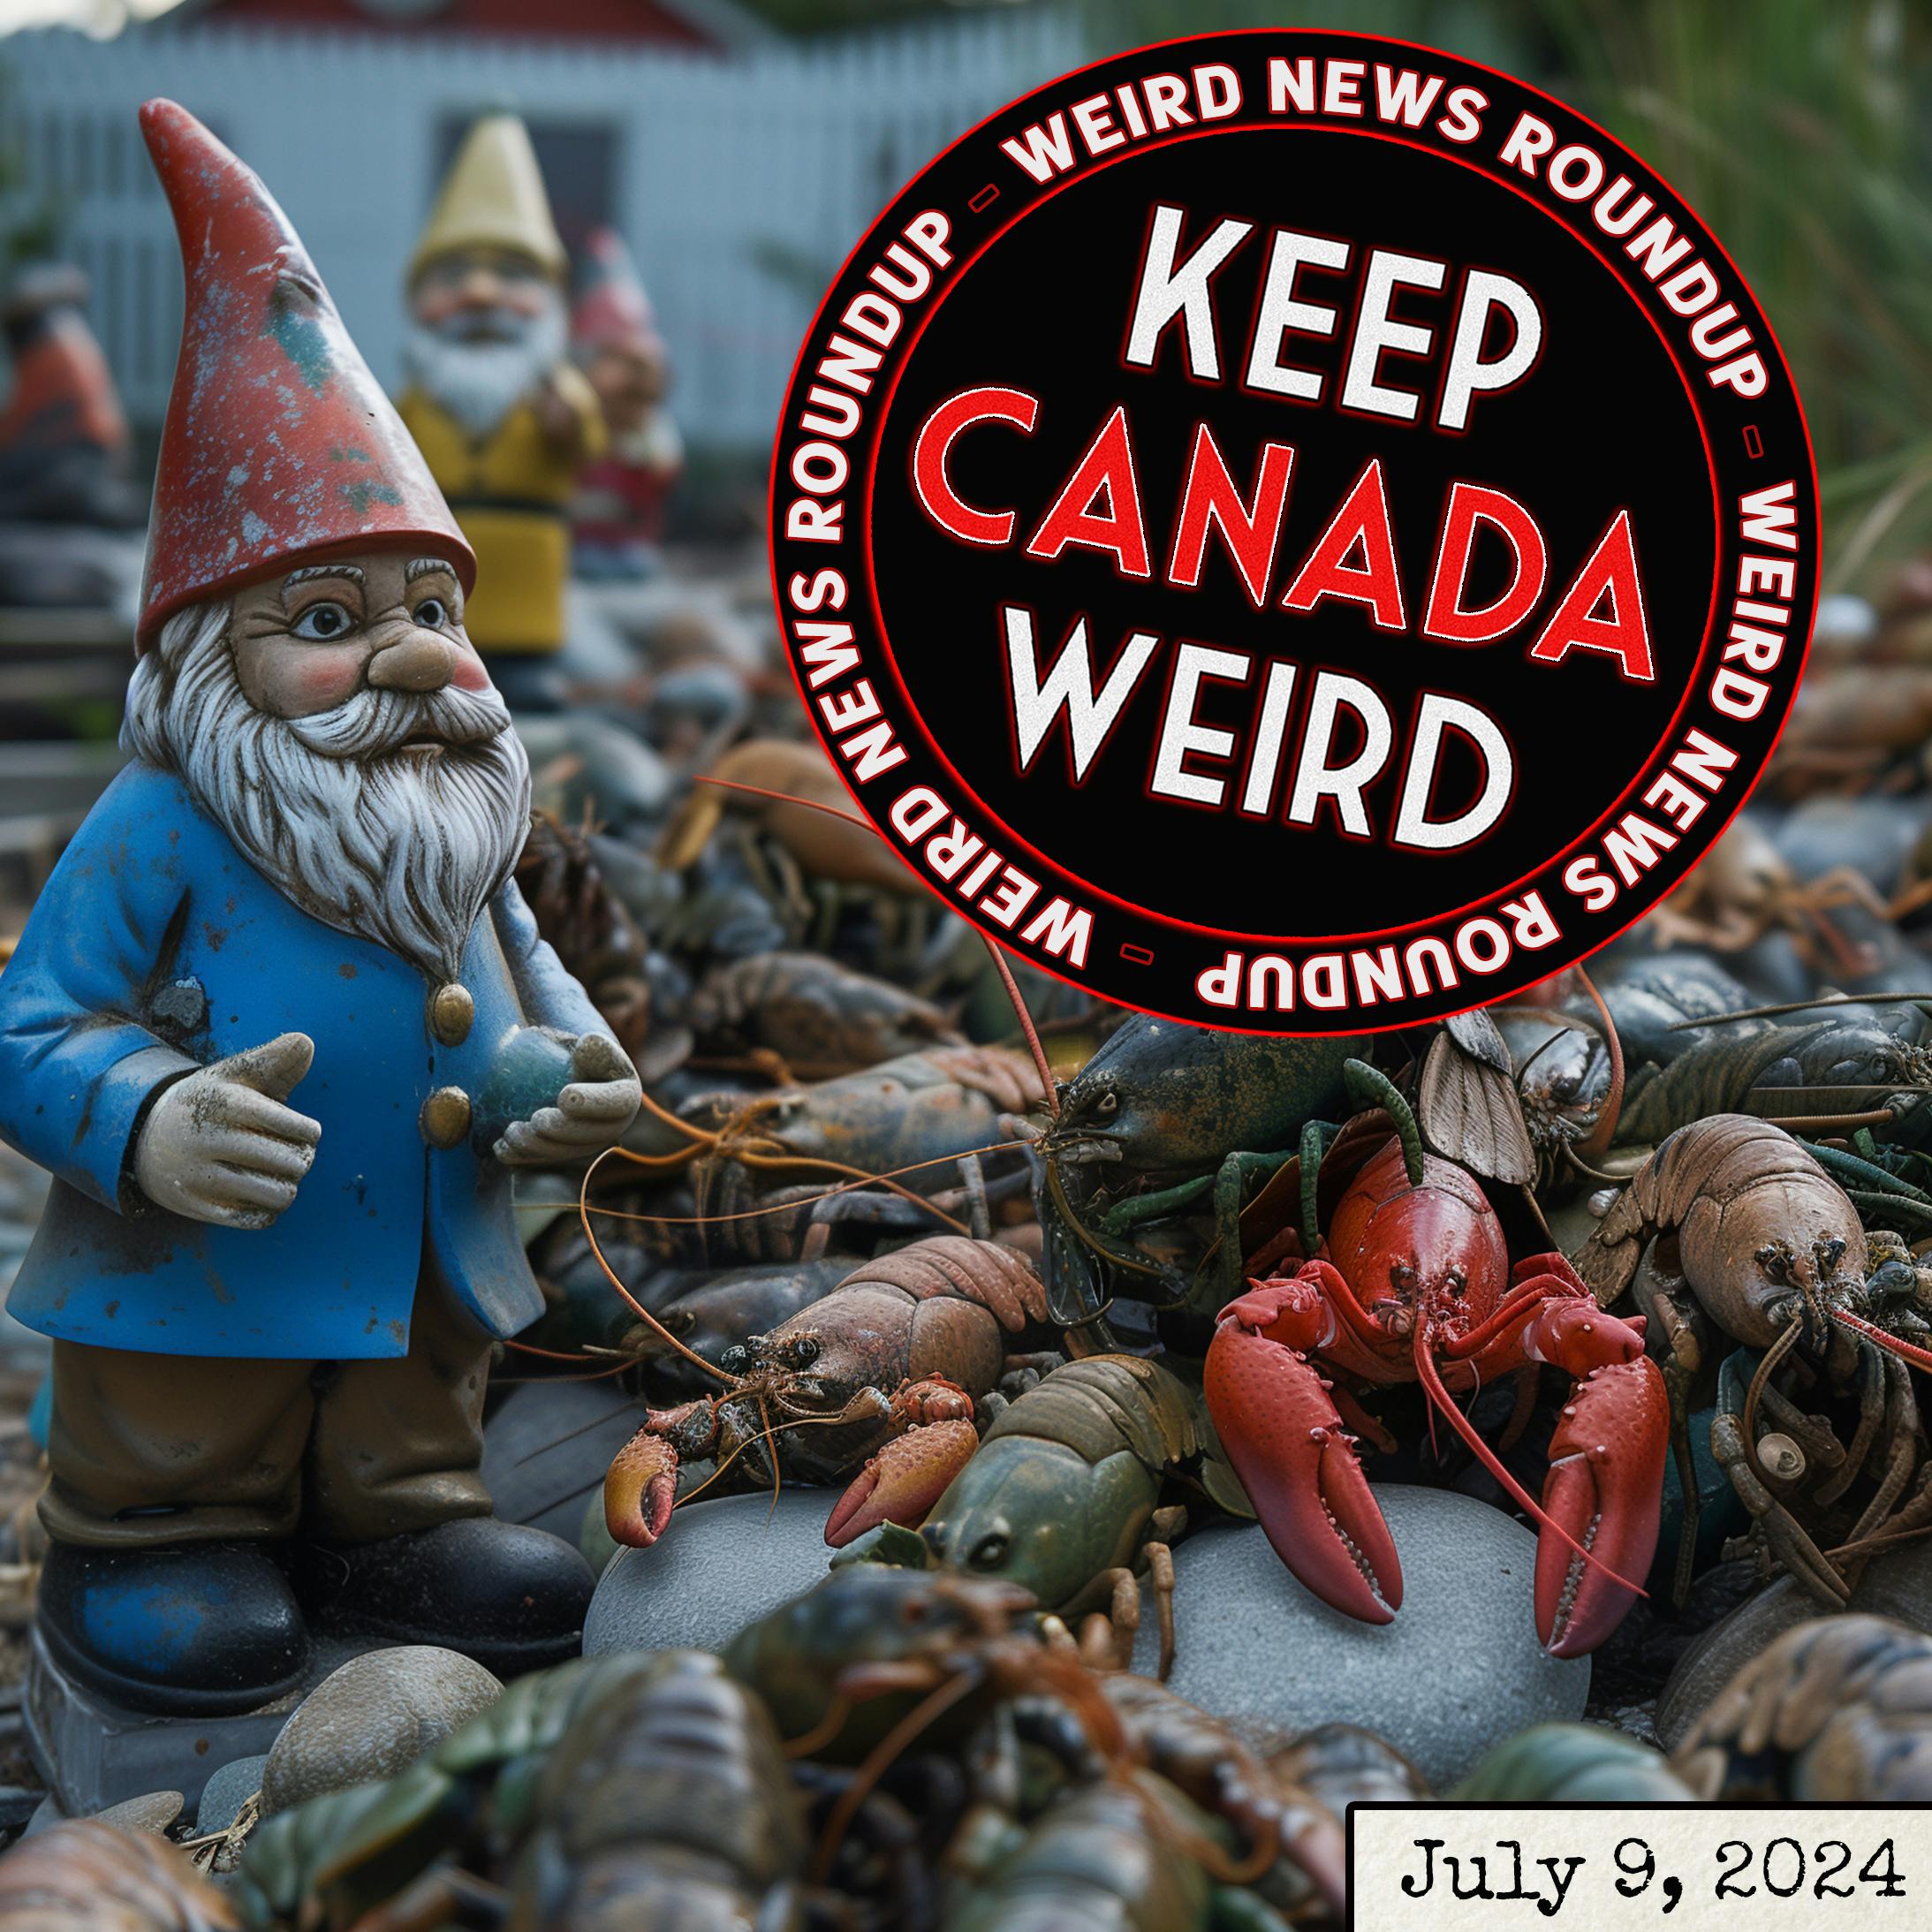 KEEP CANADA WEIRD - July 9, 2024 - nicky nicky nine door, lobsters, gnome restoration society, and a bad arsonist